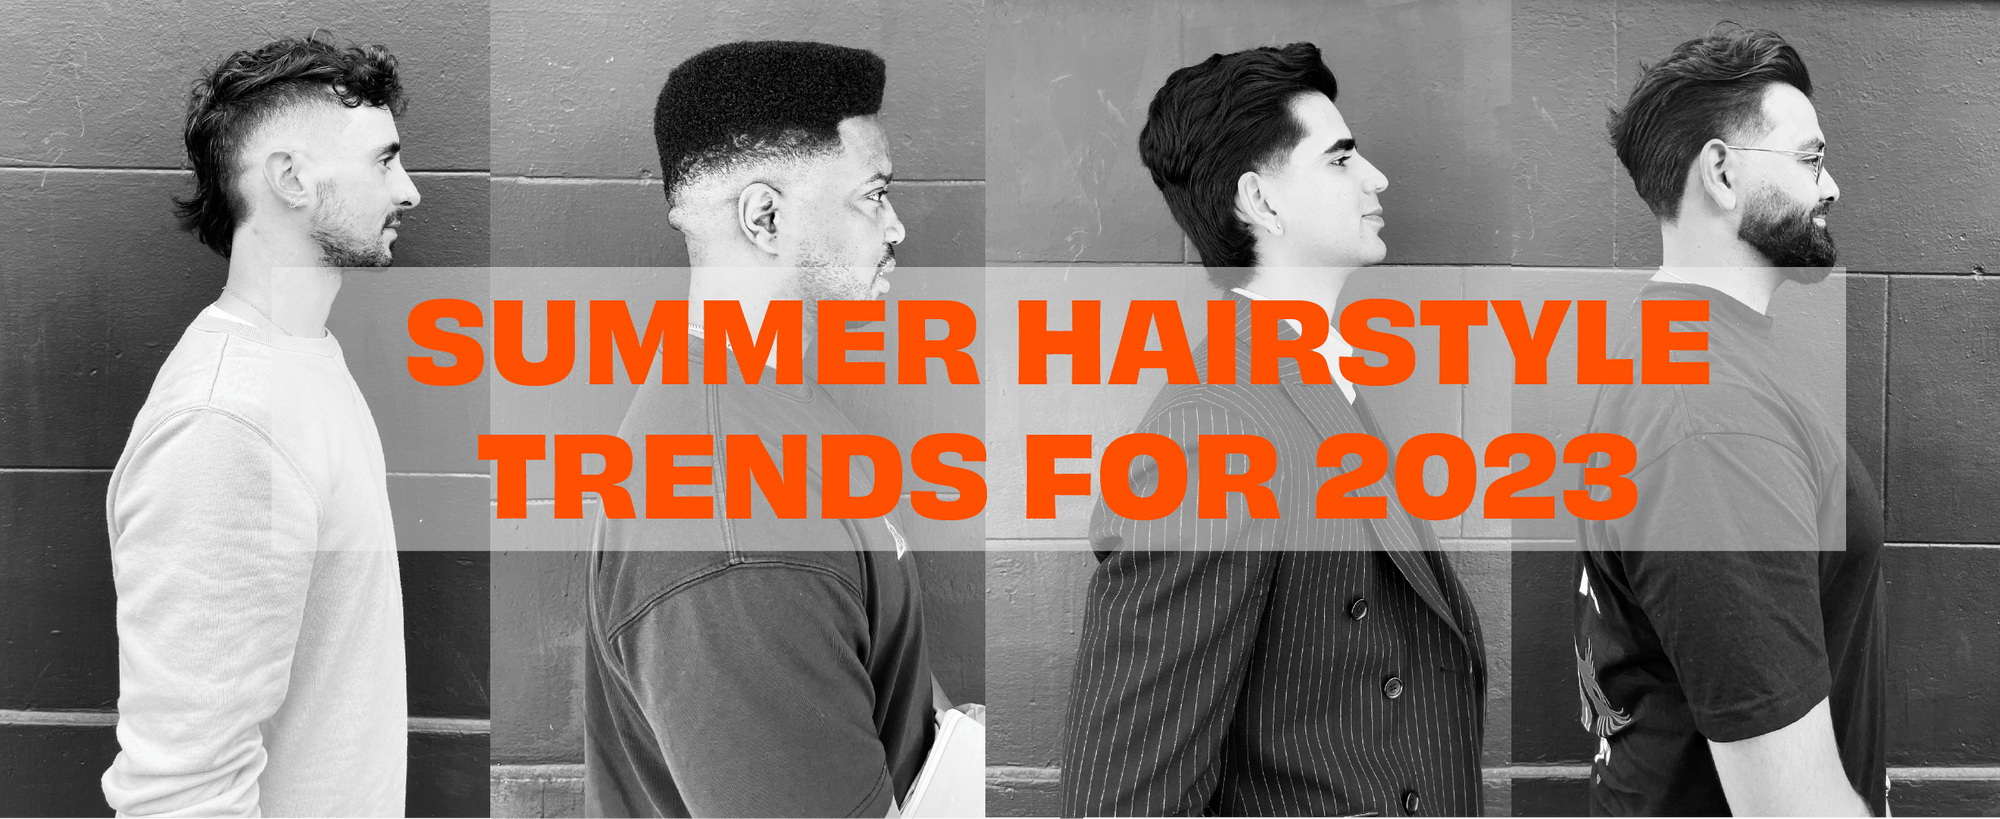 Latest Hairstyles - 74 Coolest Boys Haircuts for 2023:  https://bit.ly/424Zx2o | Facebook